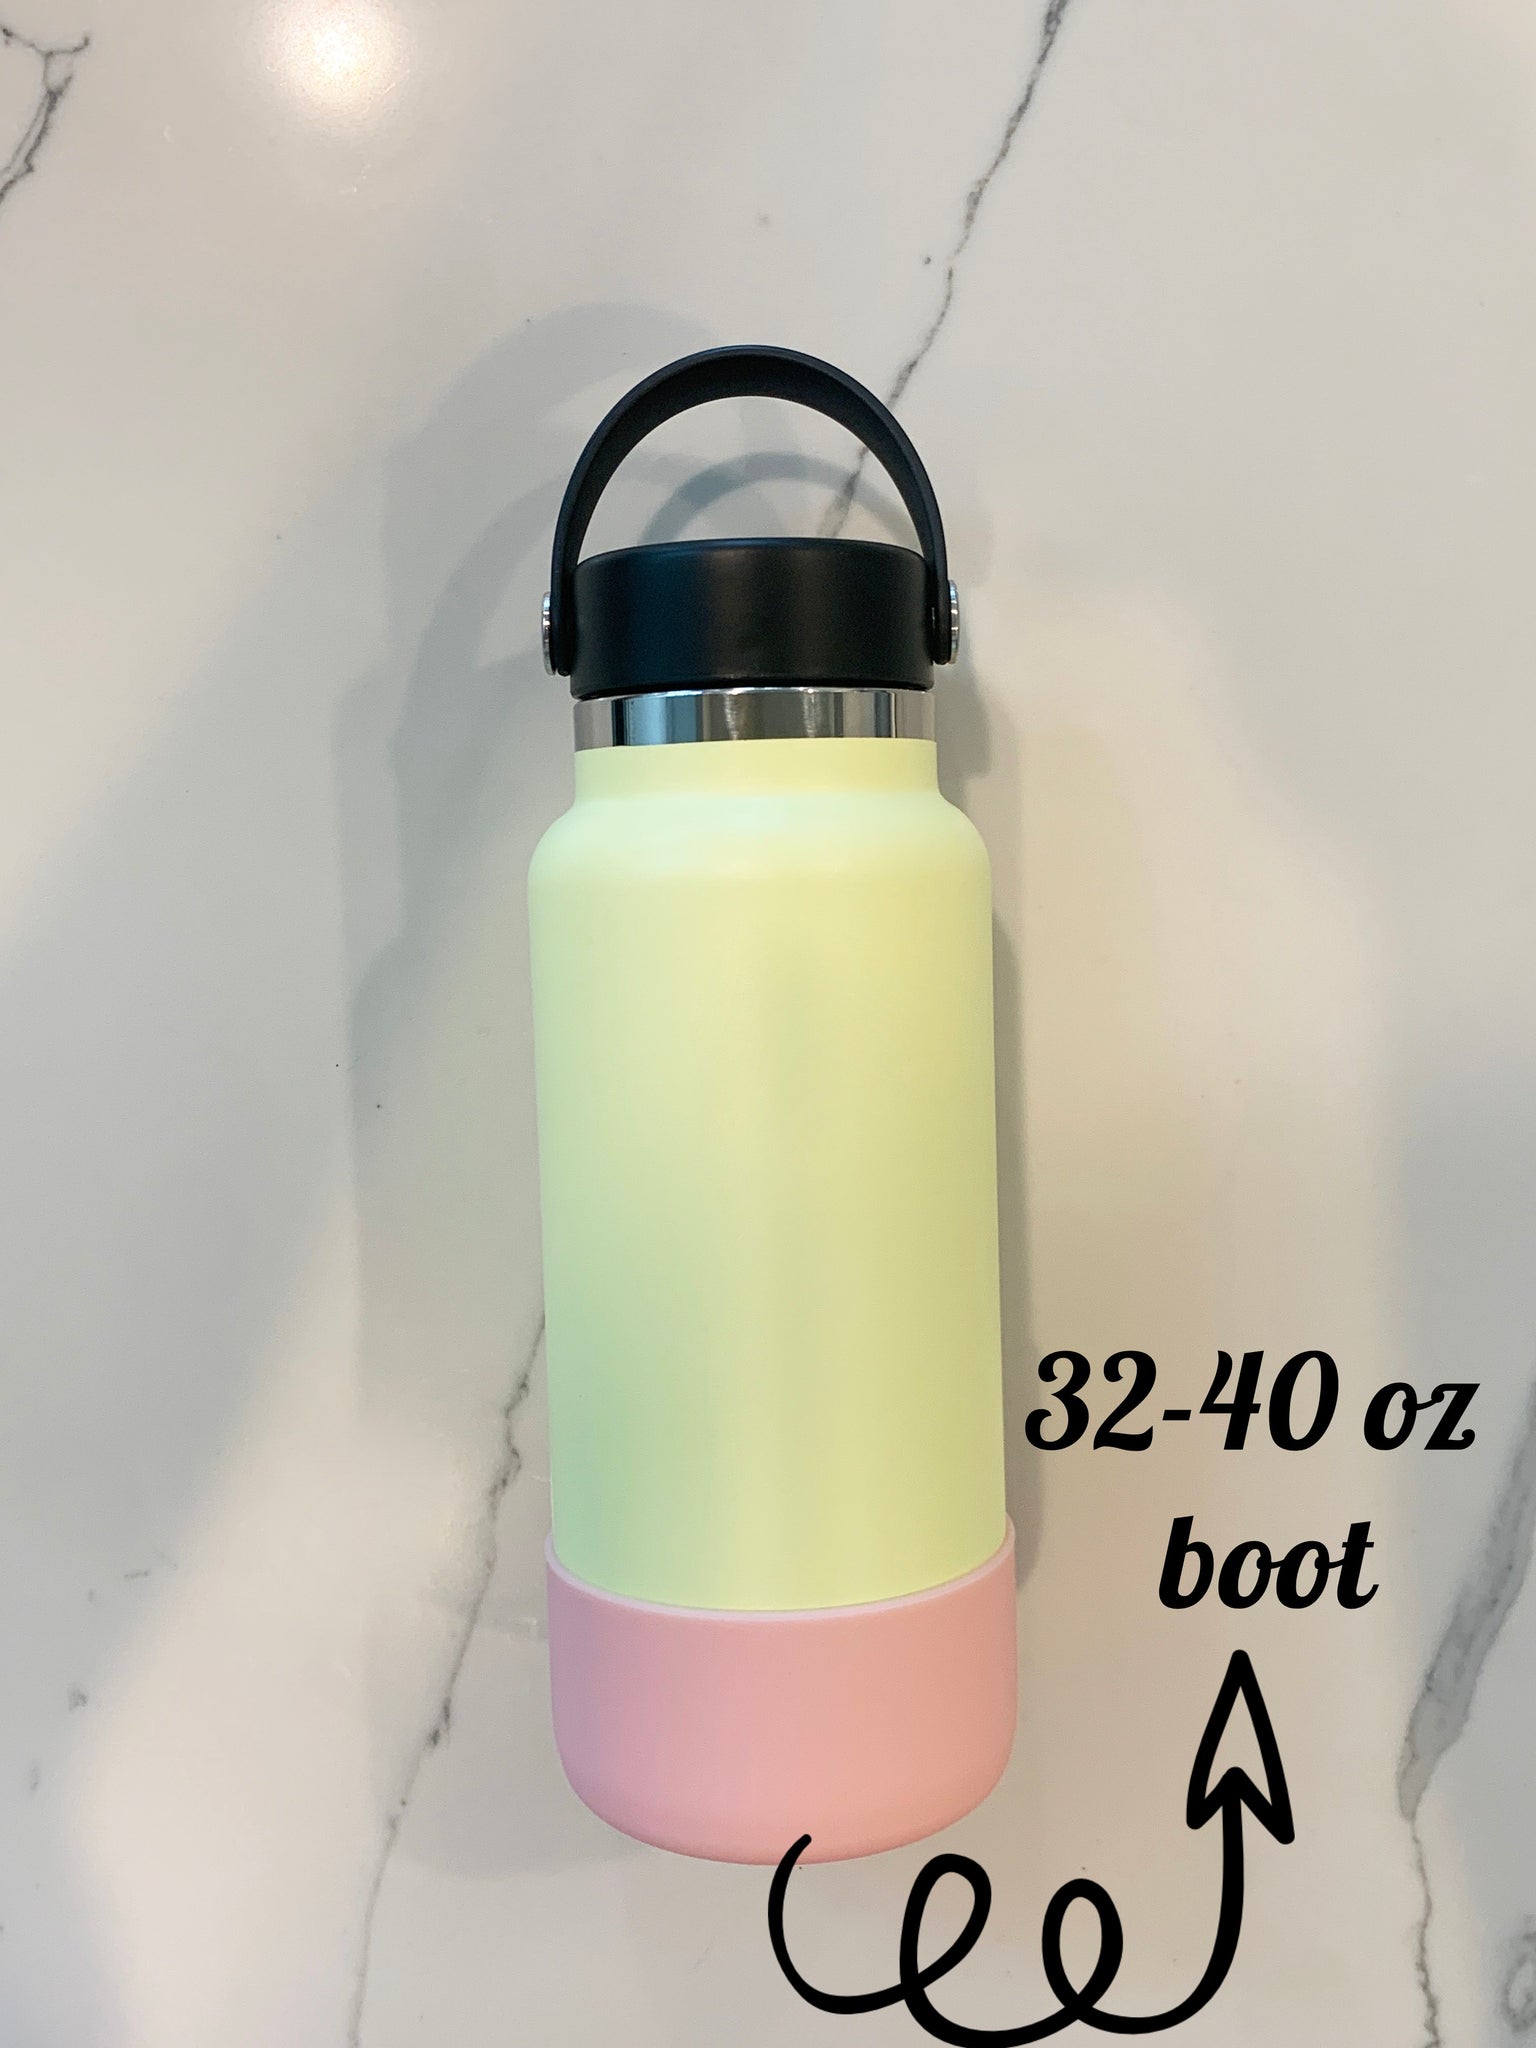  Silicone Water Bottle Boot for Hydro Flask, YETI